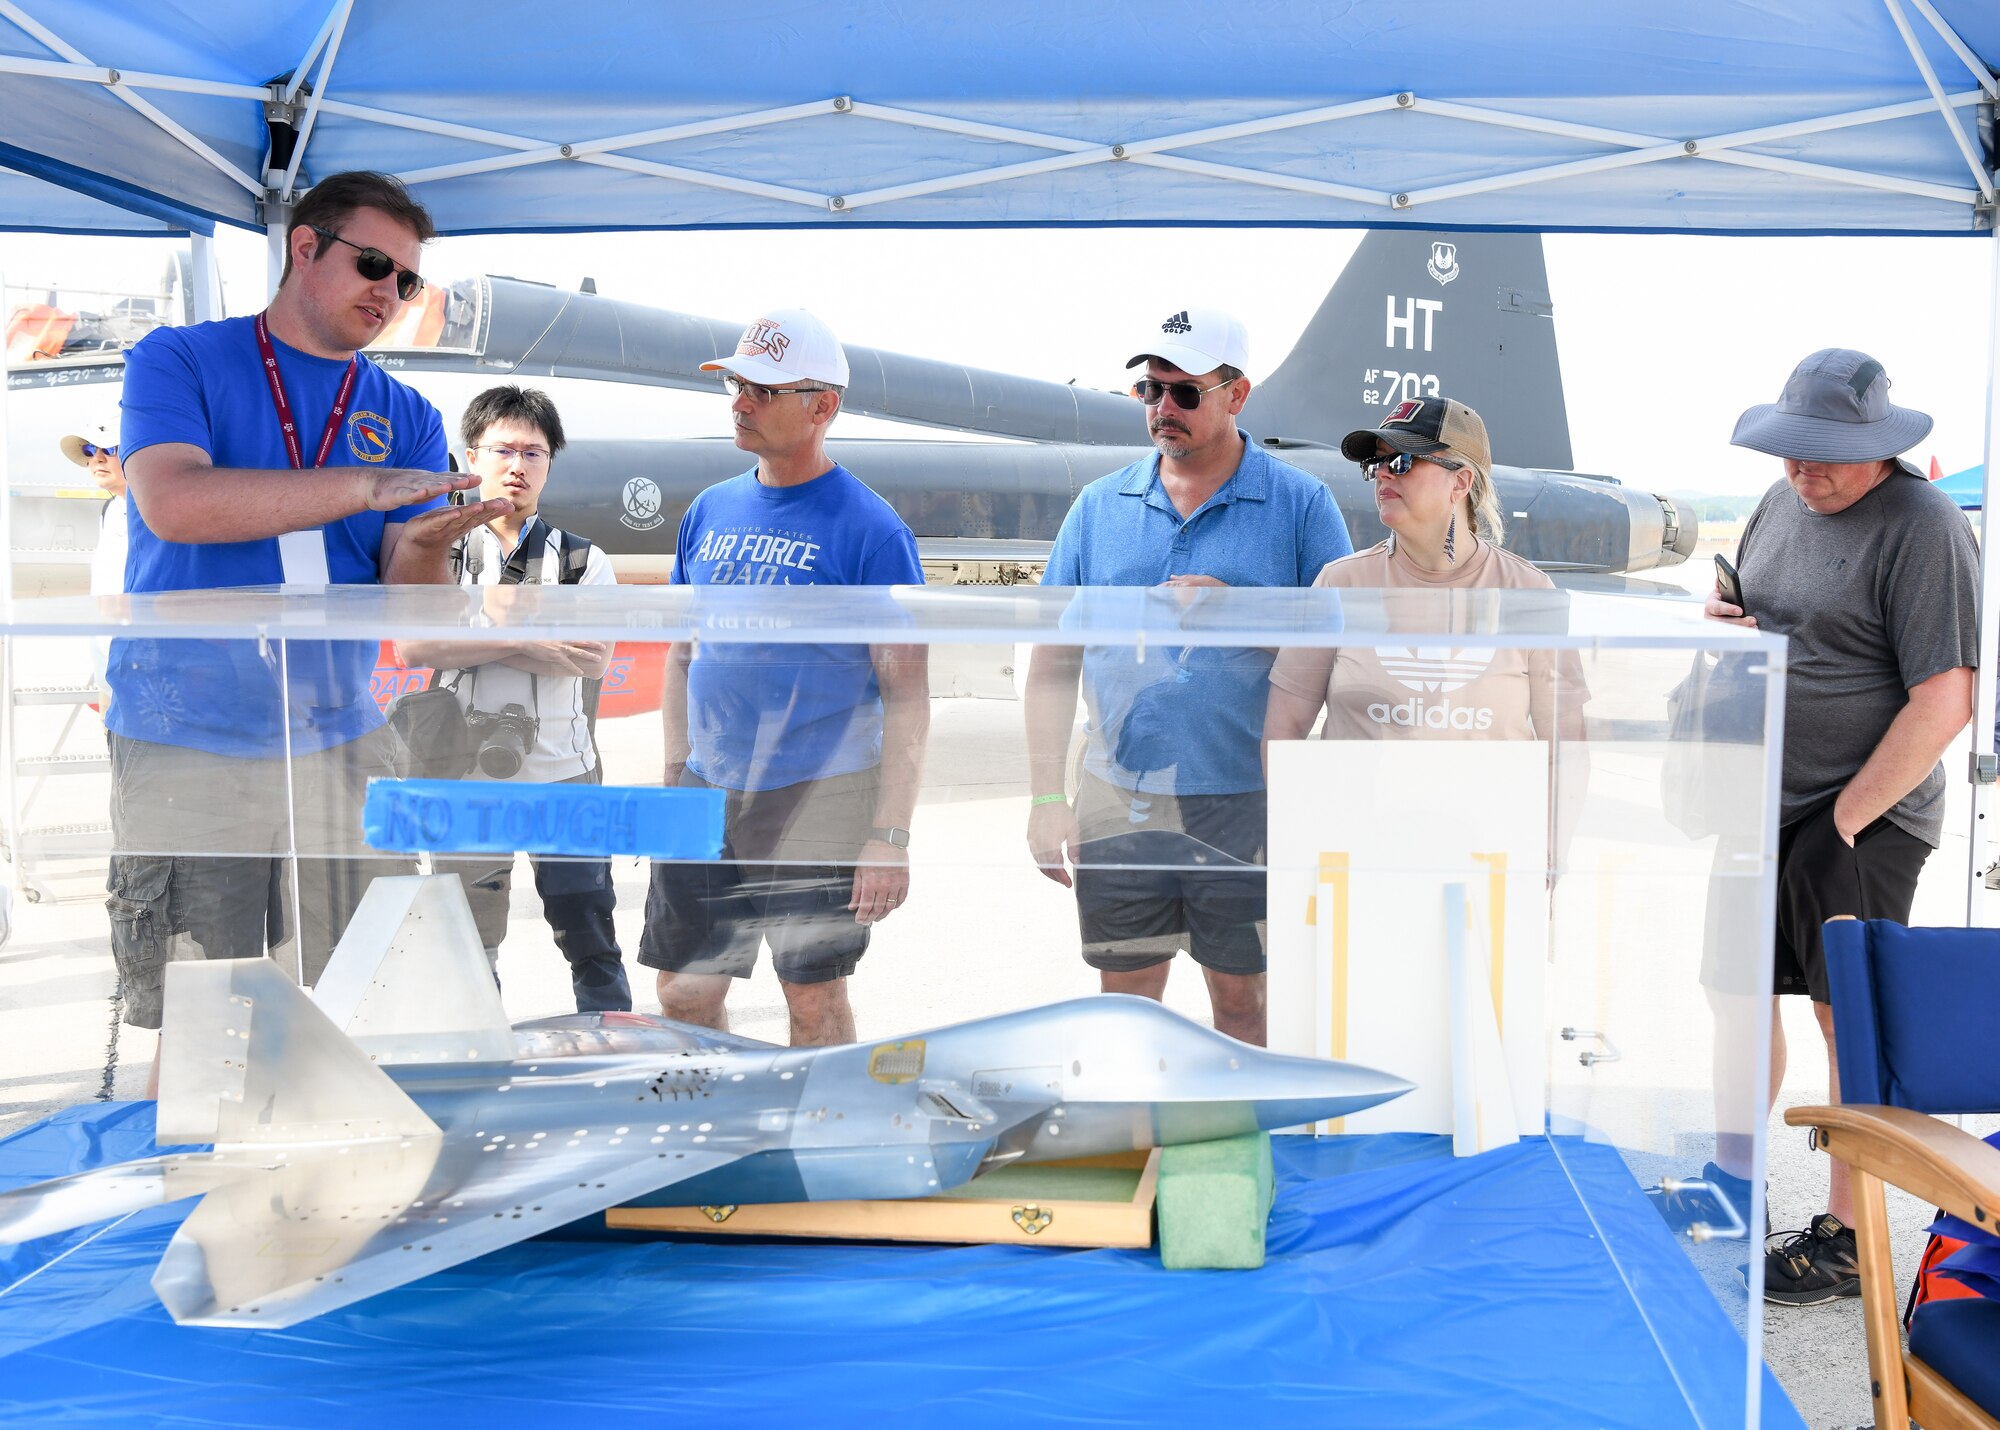 People looking at scale model of an aircraft